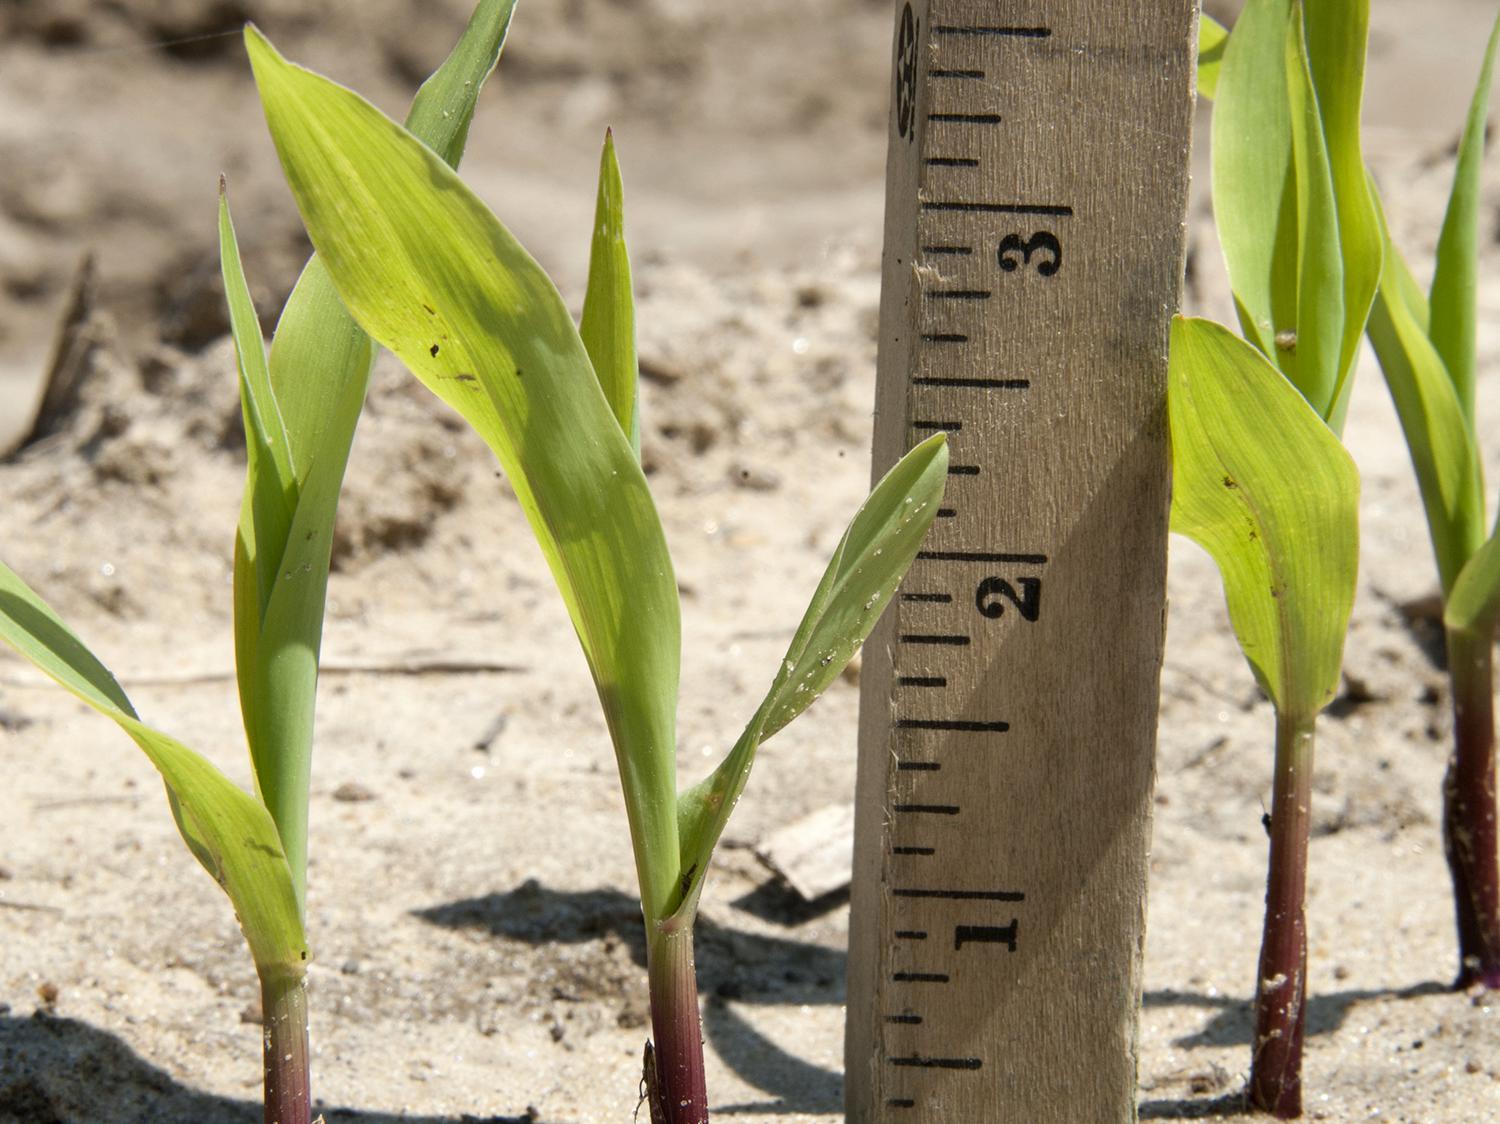 Frequent rains pushed both corn planting and corn emergence behind schedule in Mississippi. This corn was photographed April 21, 2015, in Starkville at Mississippi State University. (Photo by MSU Ag Communications/Kat Lawrence)